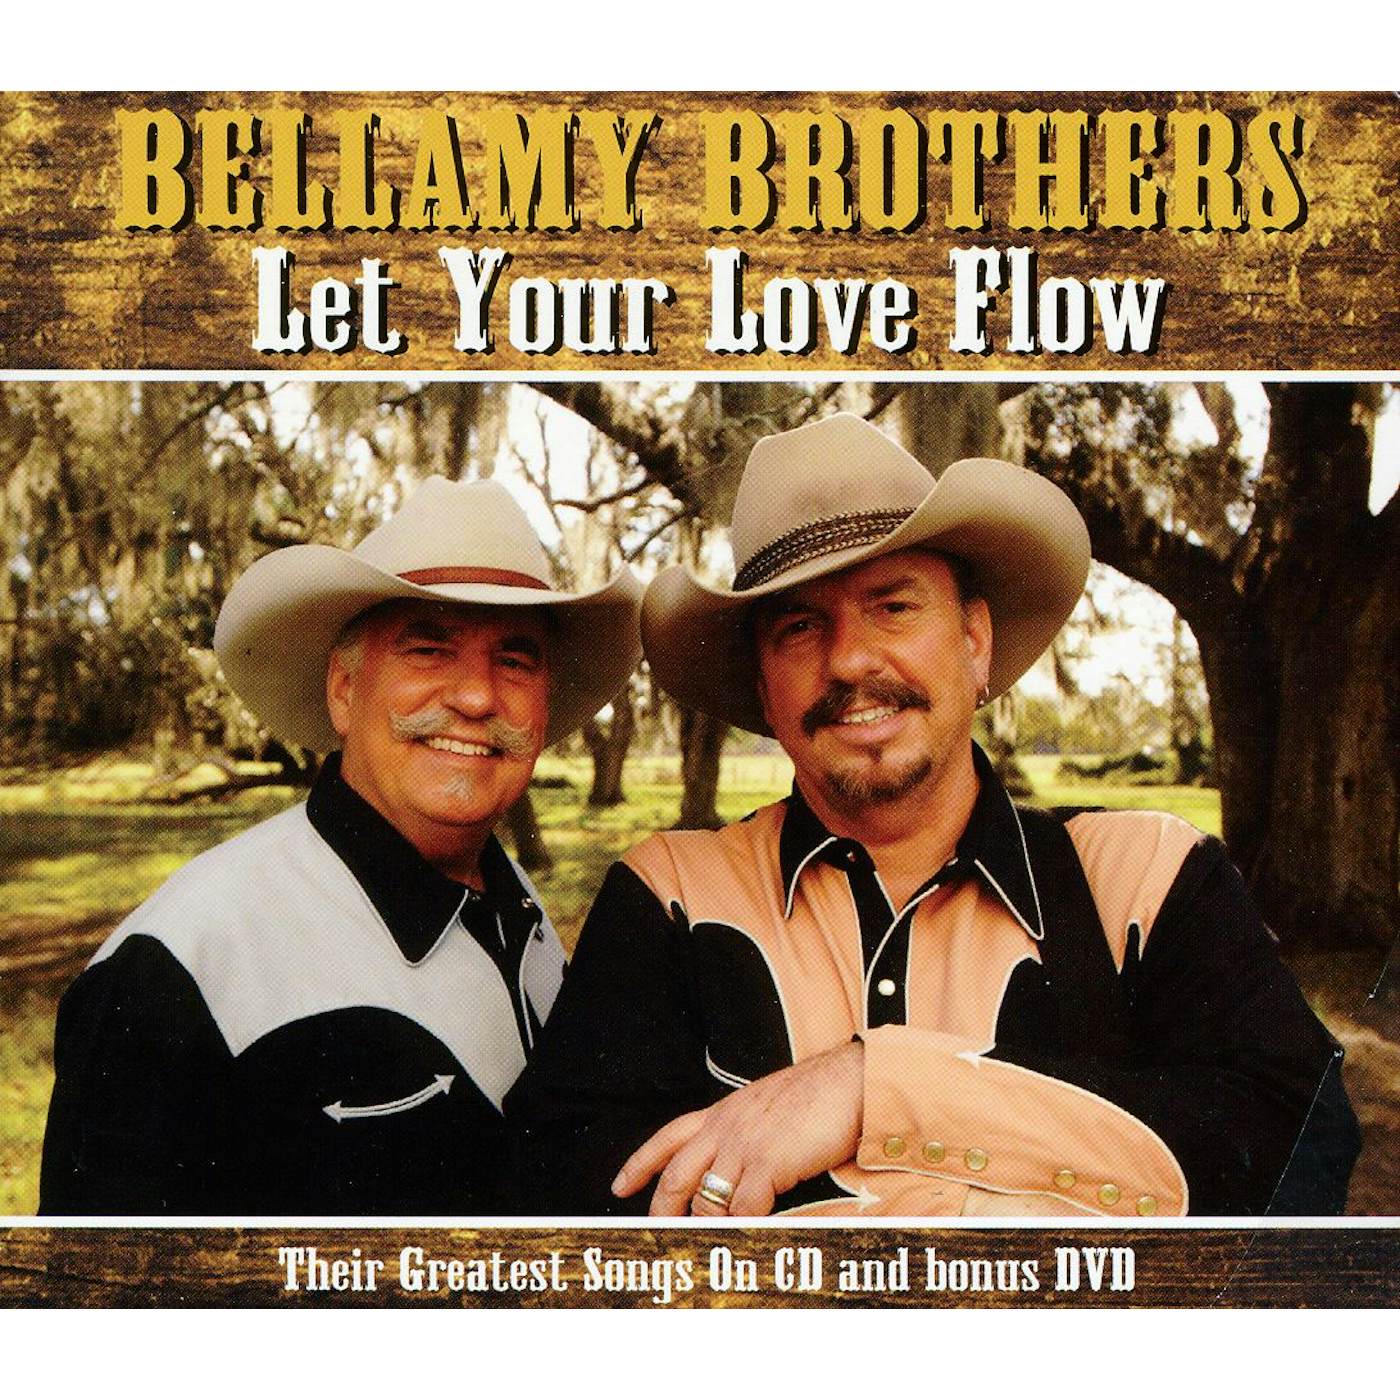 The Bellamy Brothers LET YOUR LOVE FLOW CD